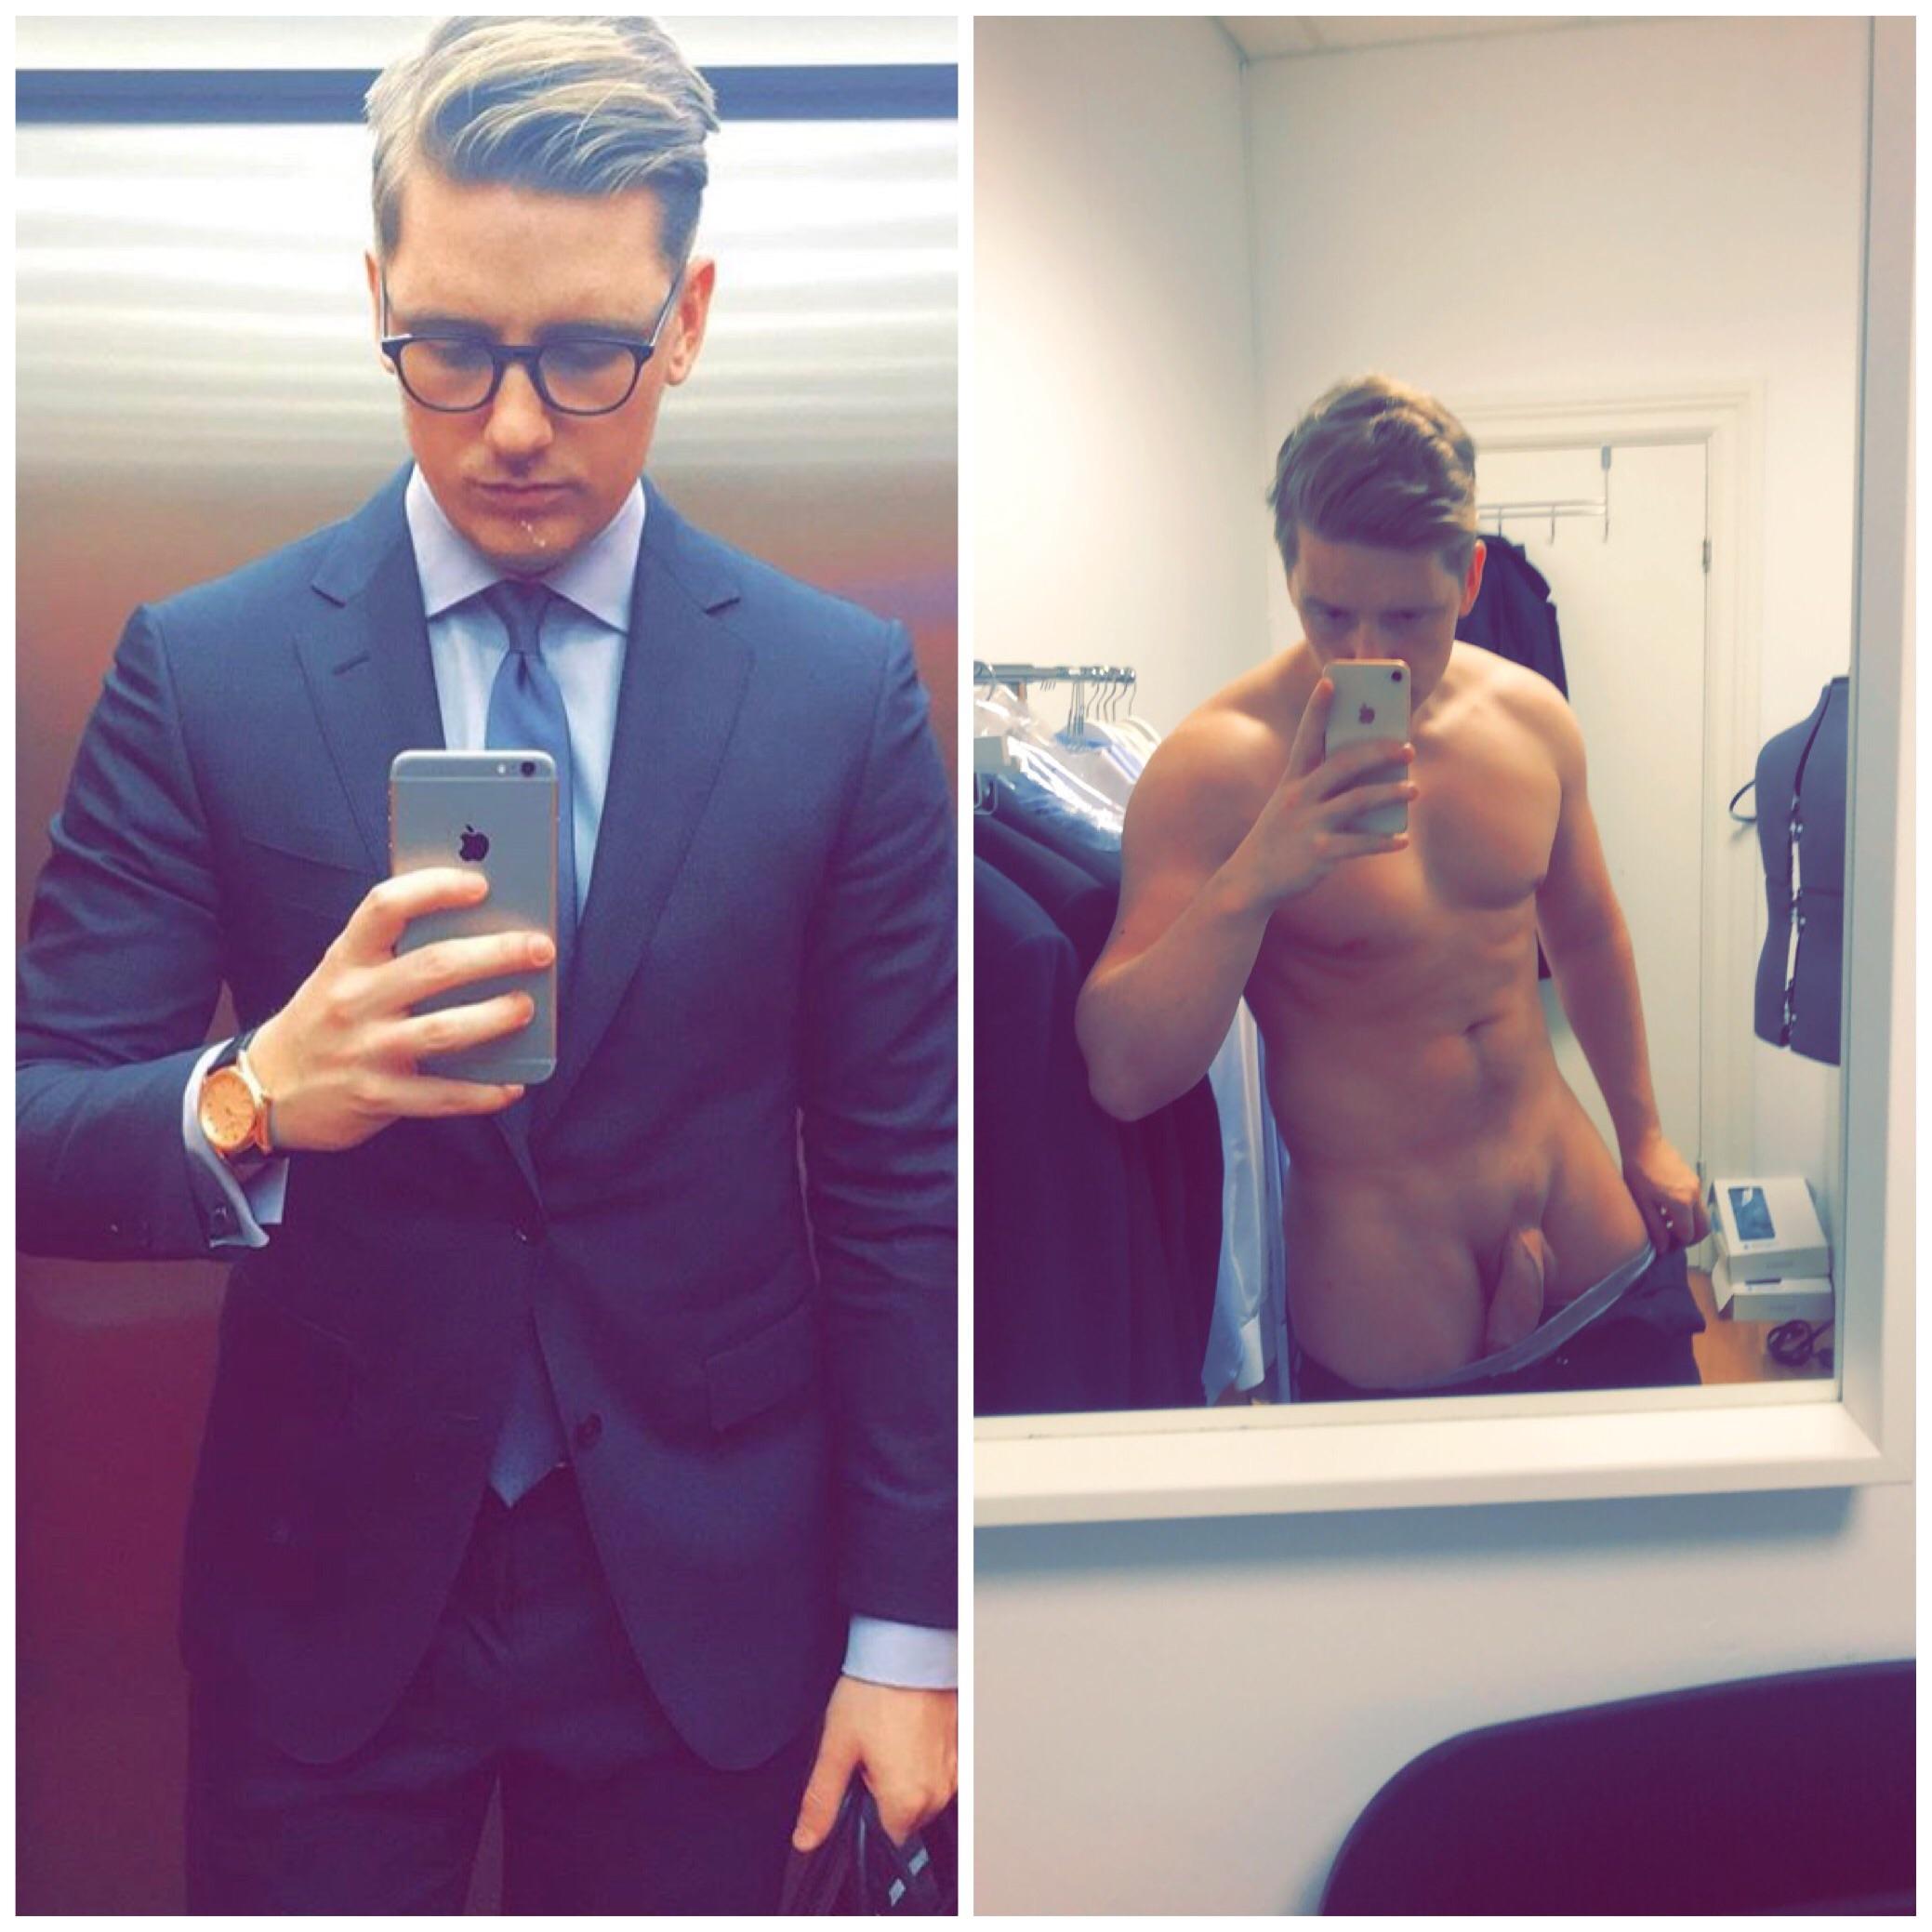 Me at work vs me not at work! Anyone but me who loves a good suit?;) PMs welcome (face in comment)